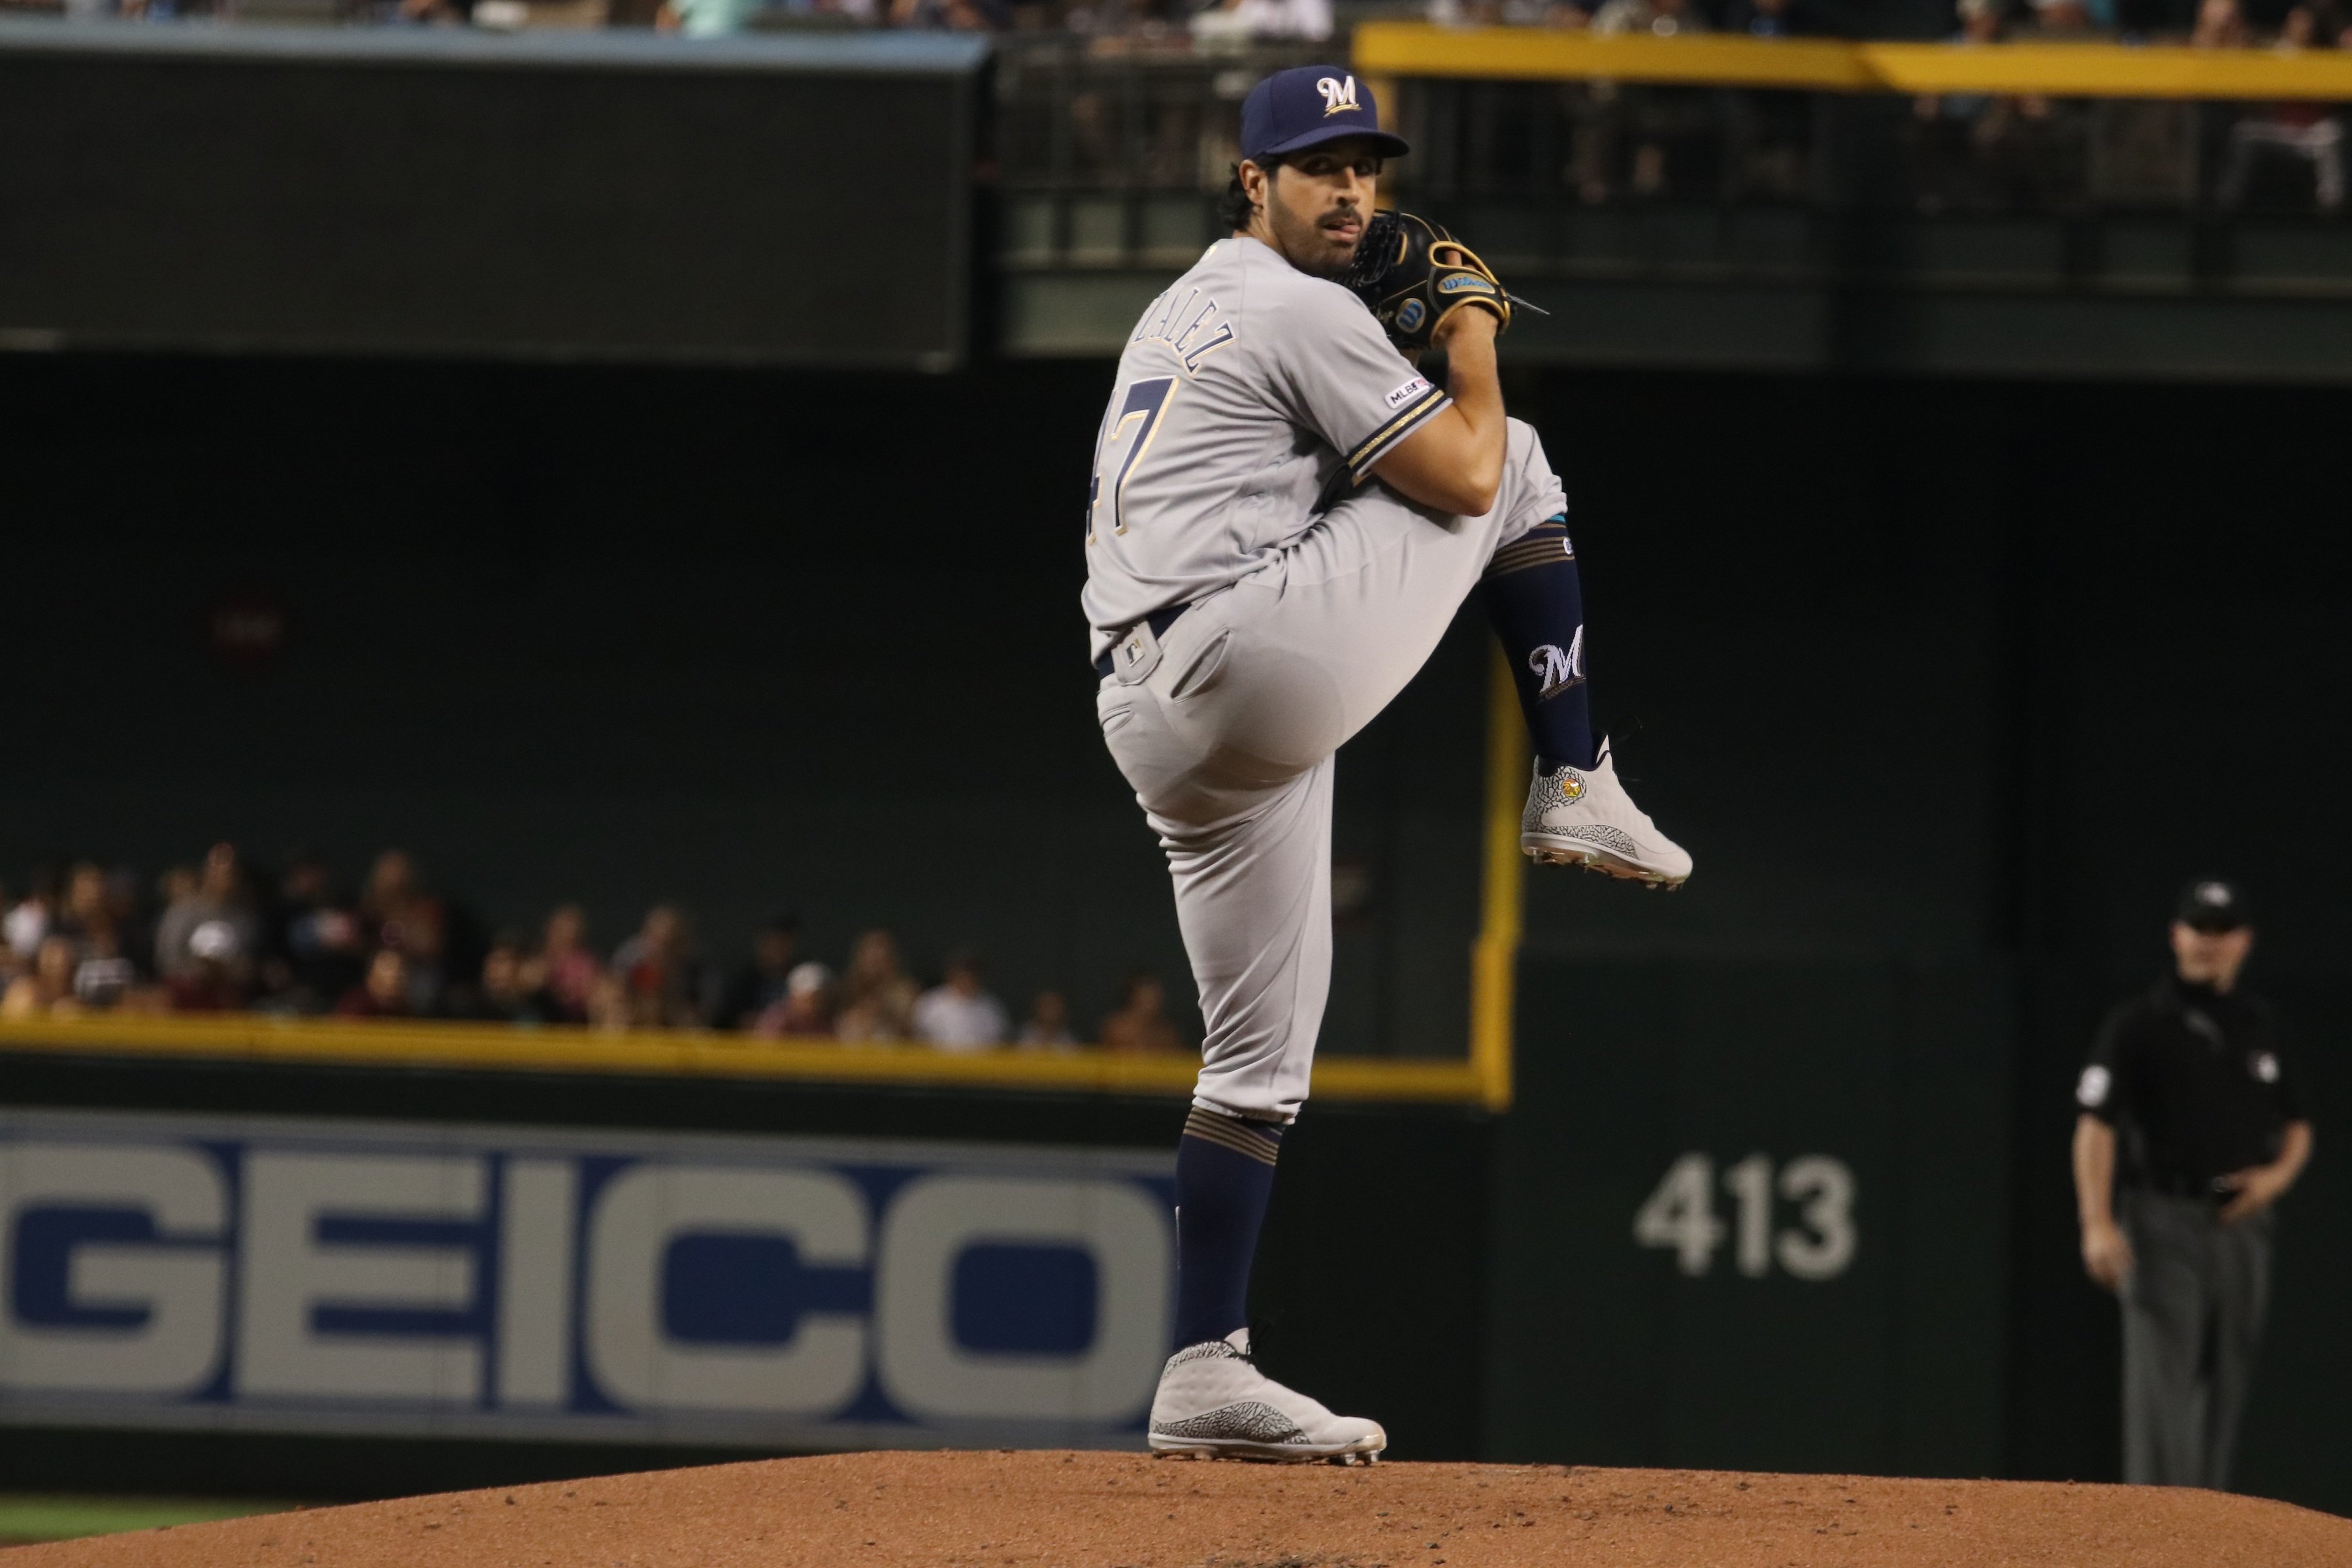 Gio Gonzalez pitcher for the Milwaukee Brewers at Chase Field in Phoenix, Arizona/USA July 21, 2019. | Source: Shutterstock. 